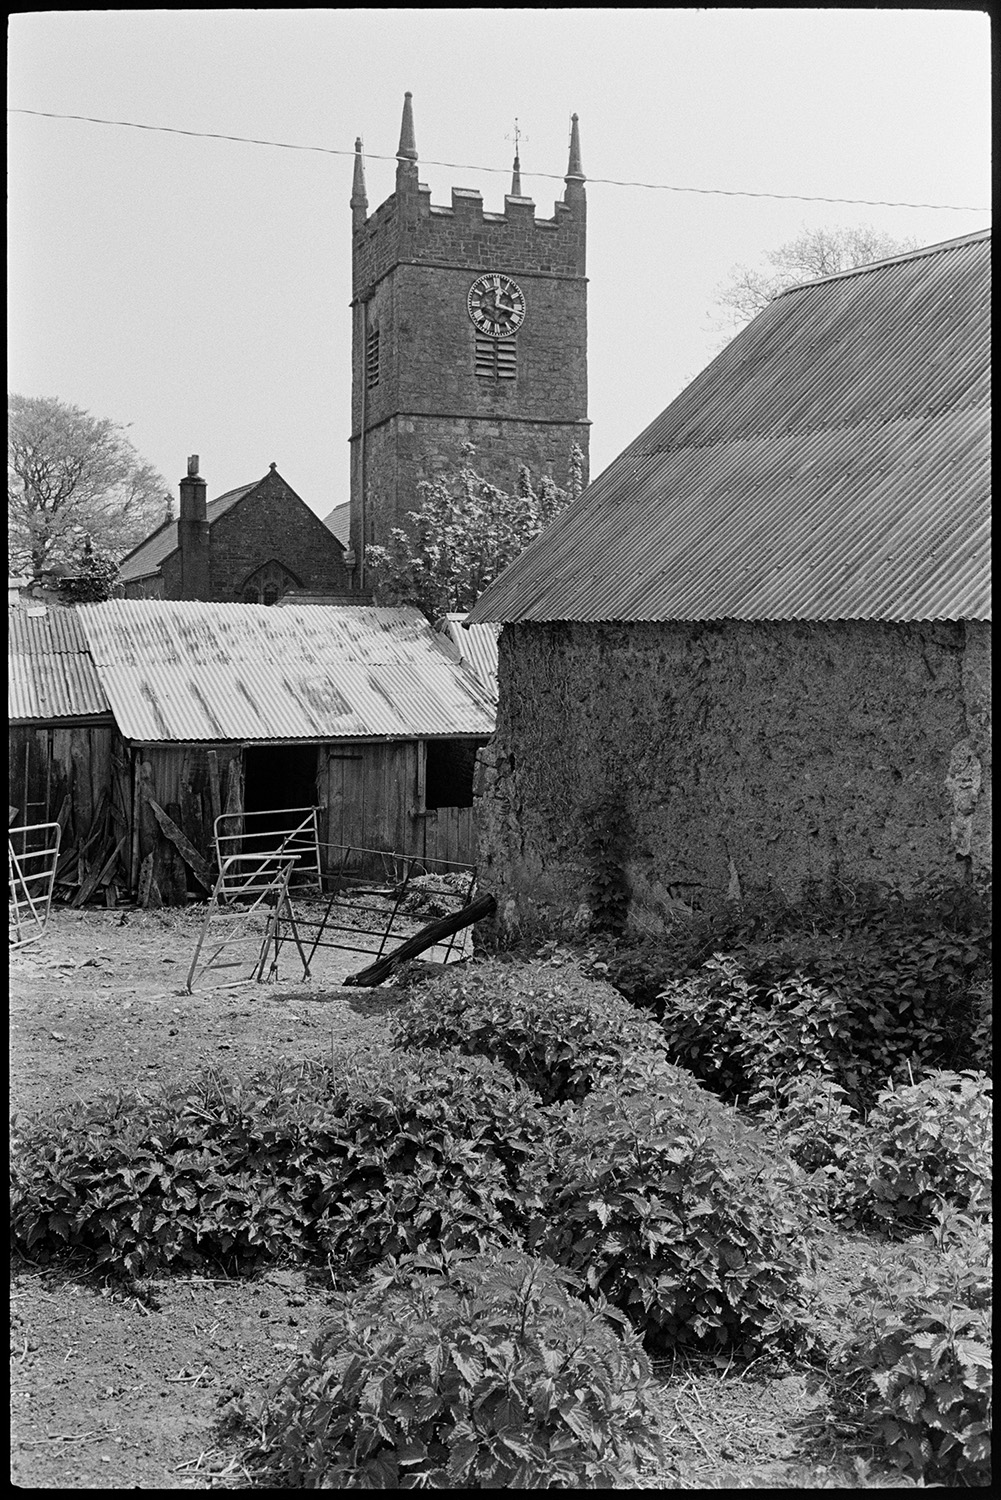 House with porch, people chatting, slate roofed workshop or forge? Church tower. 
[Cob and wood farm buildings or barns with corrugated iron roofs at Northlew. An overgrown area with stinging nettles is visible in the foreground and Northlew Church tower can be seen in the background.]